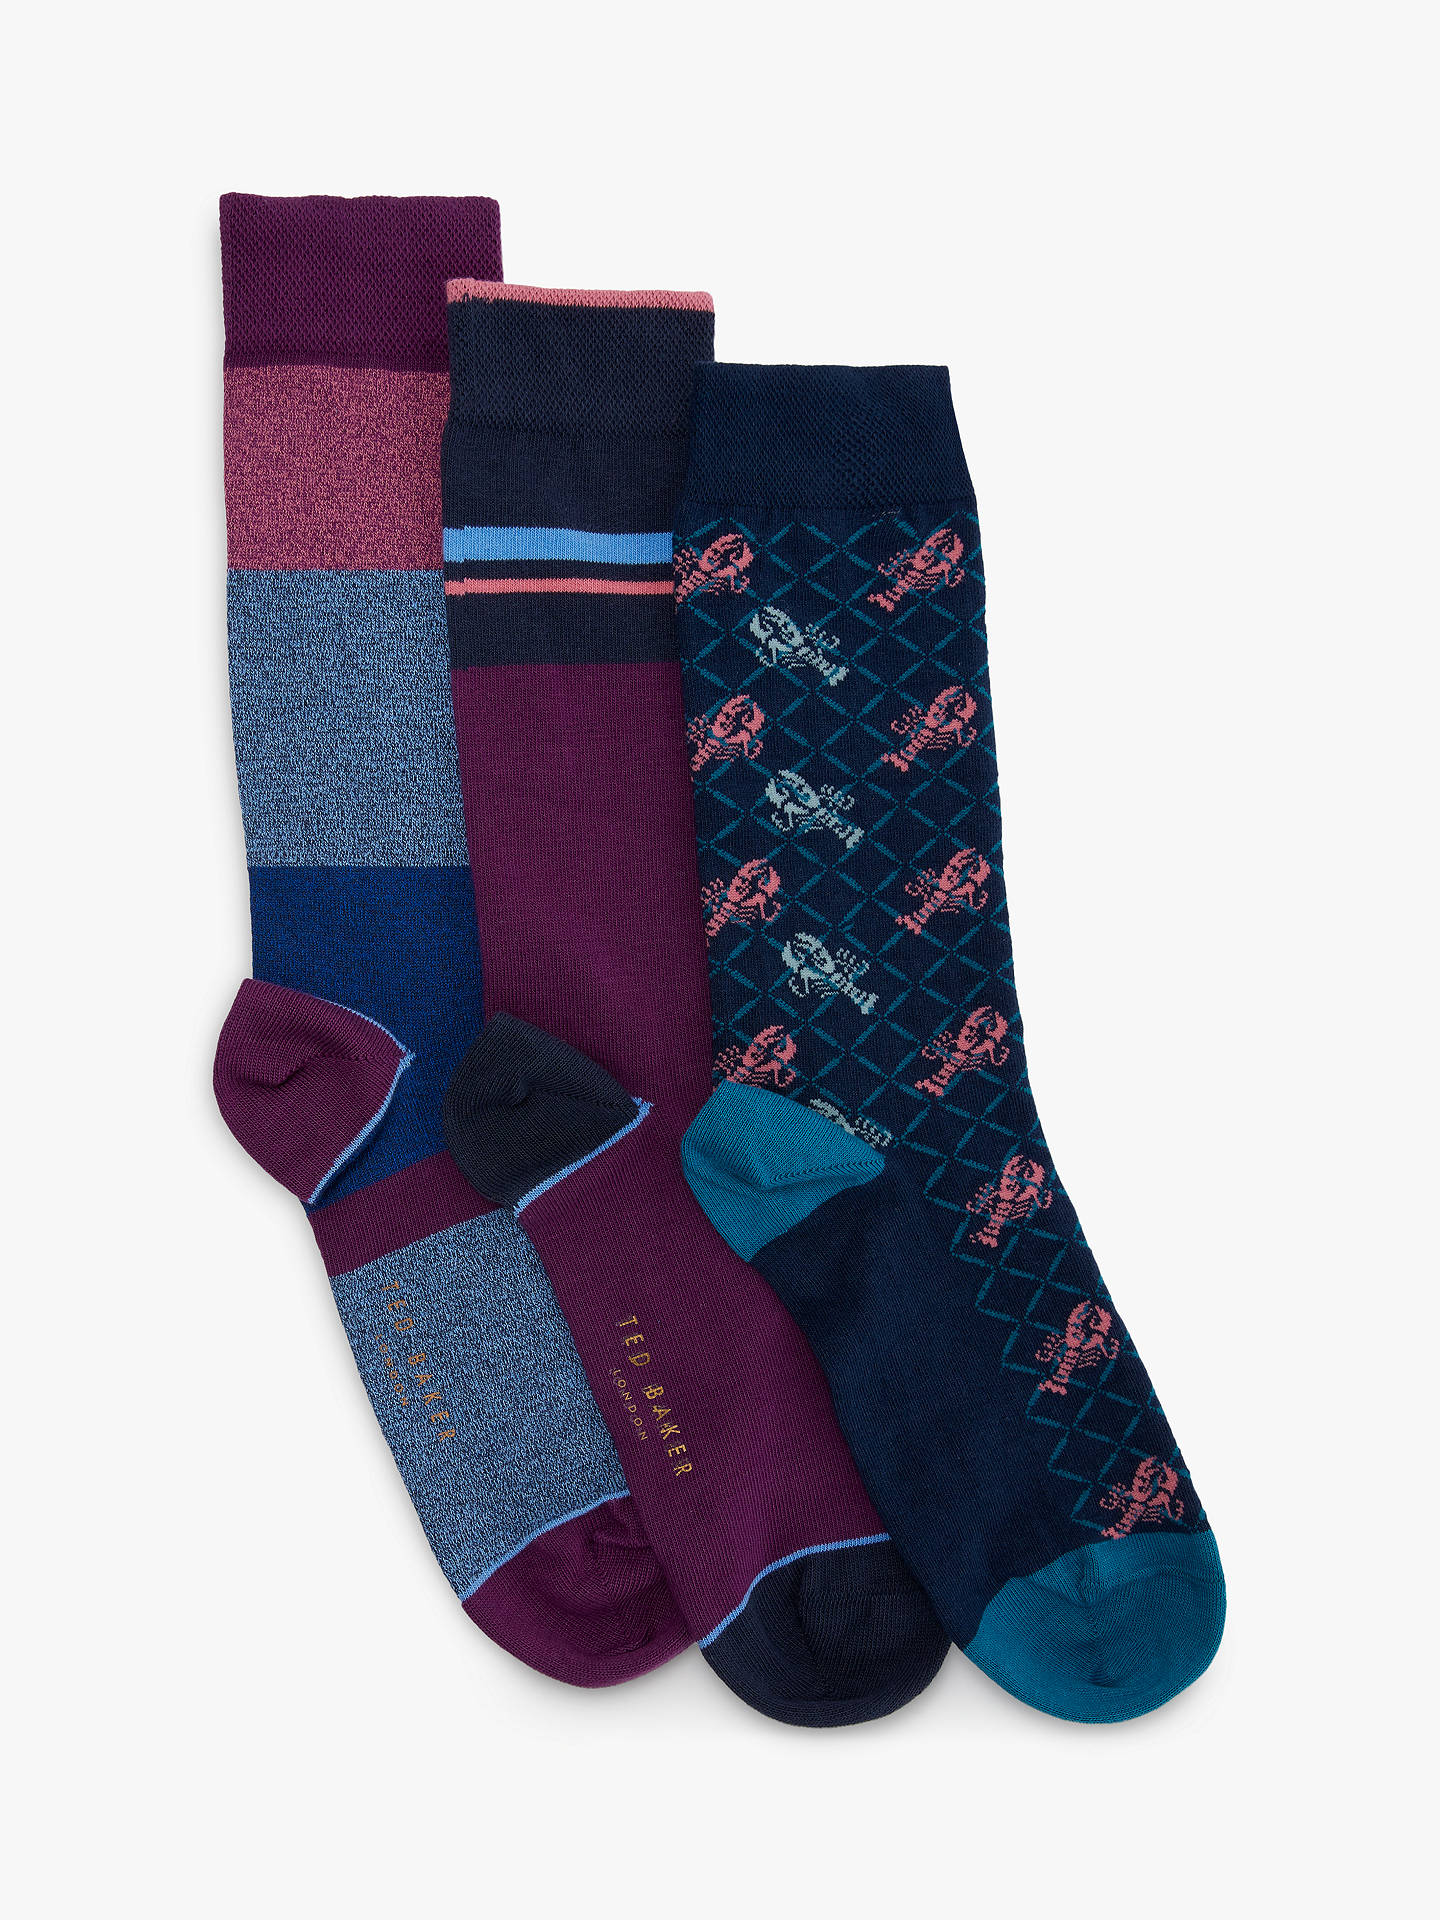 Ted Baker Stripe and Lobster Socks, Pack of 3, One Size at John Lewis ...